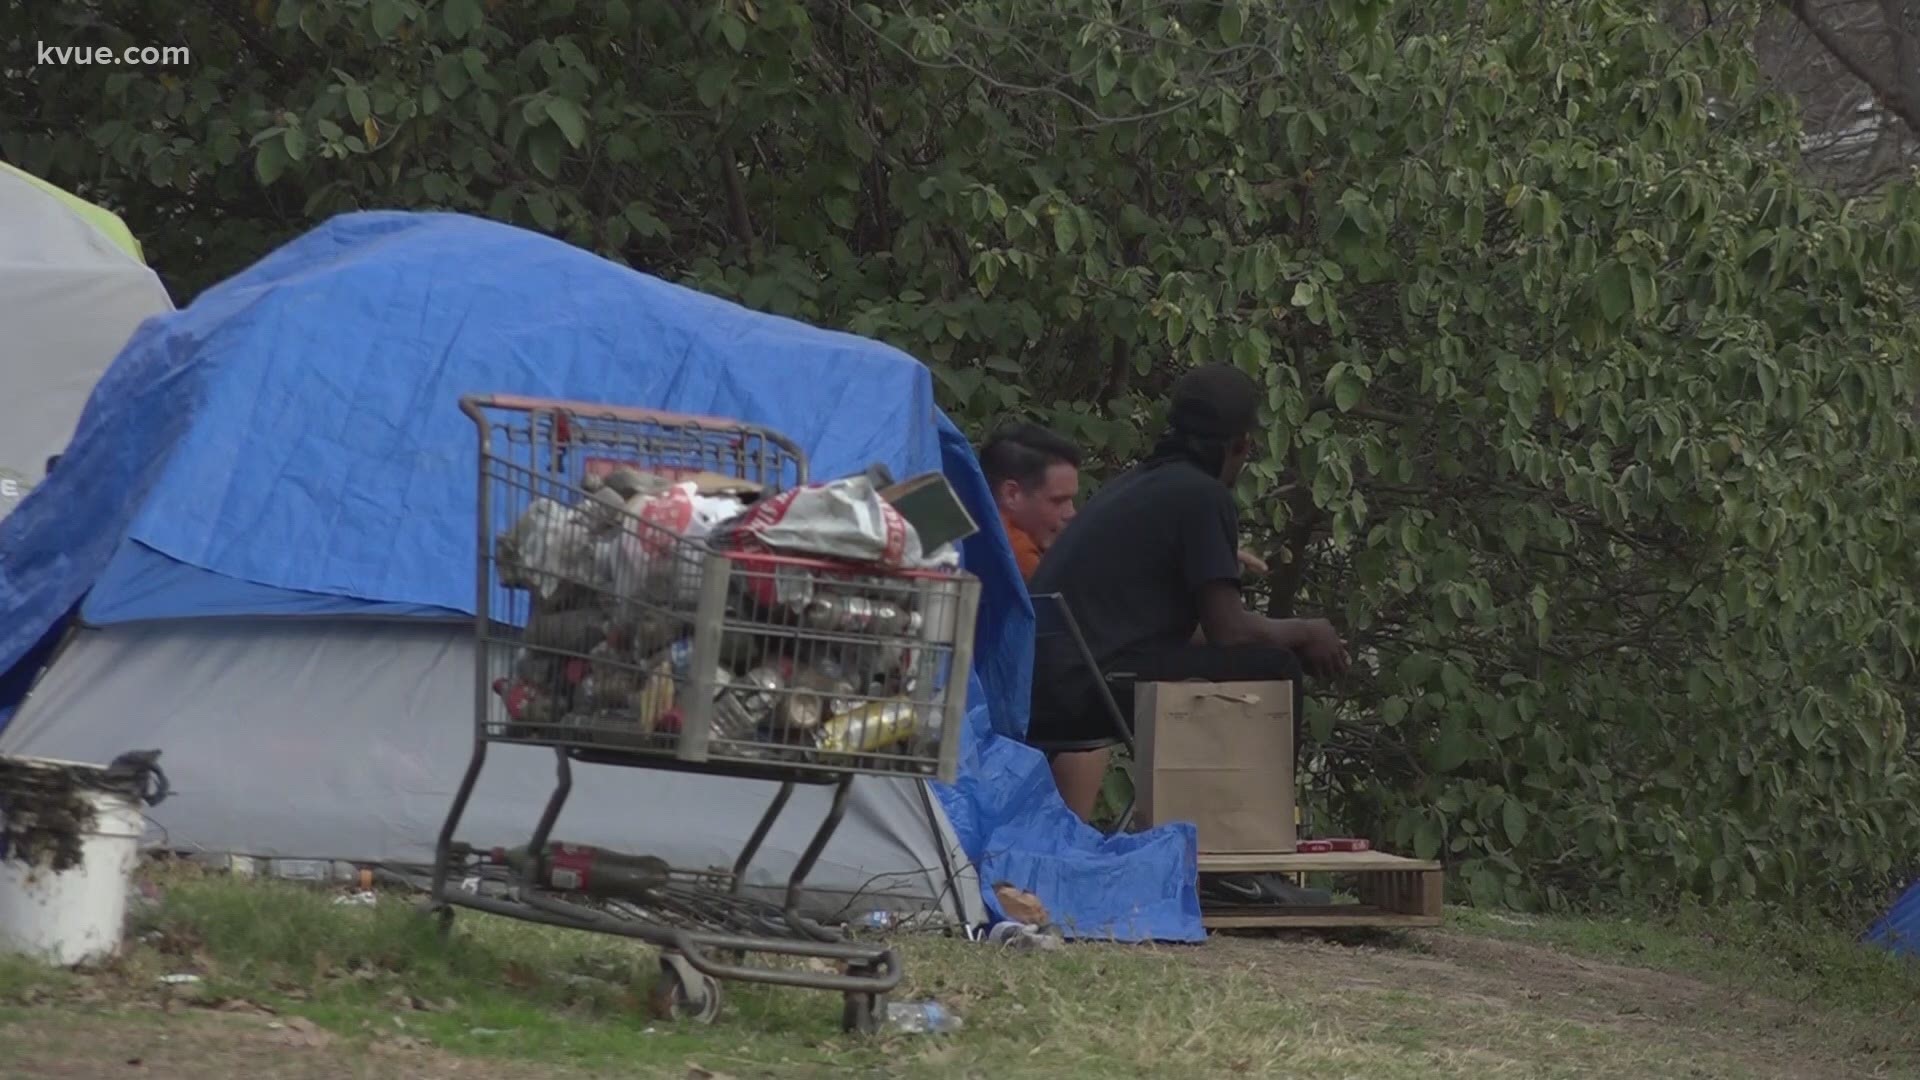 Public camping will once again be banned in certain areas in Austin starting next week.